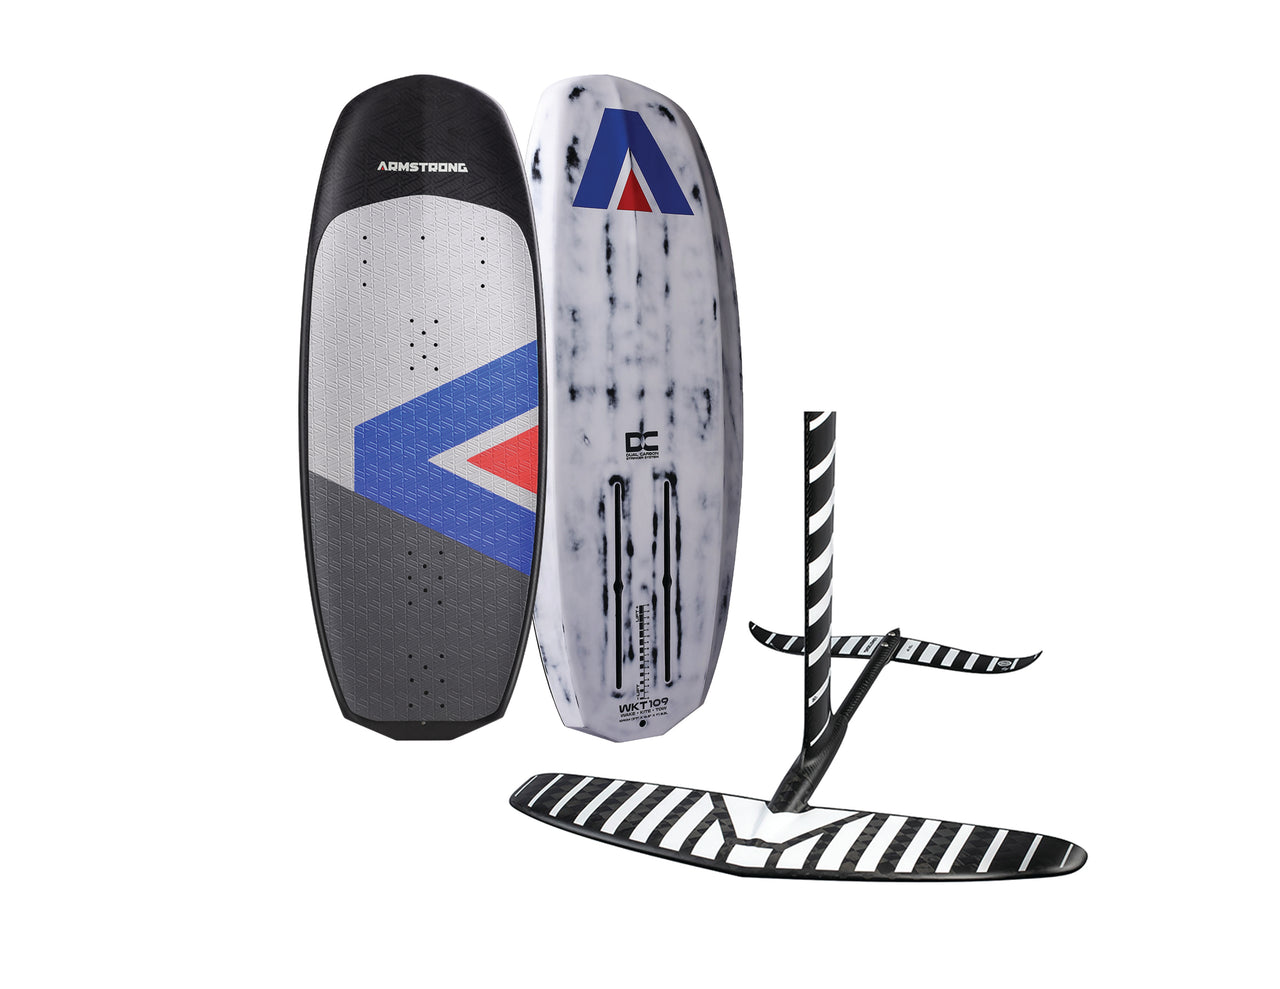 Armstrong Wakefoil Board W/ Armstrong HS1050 Foil Kit Package